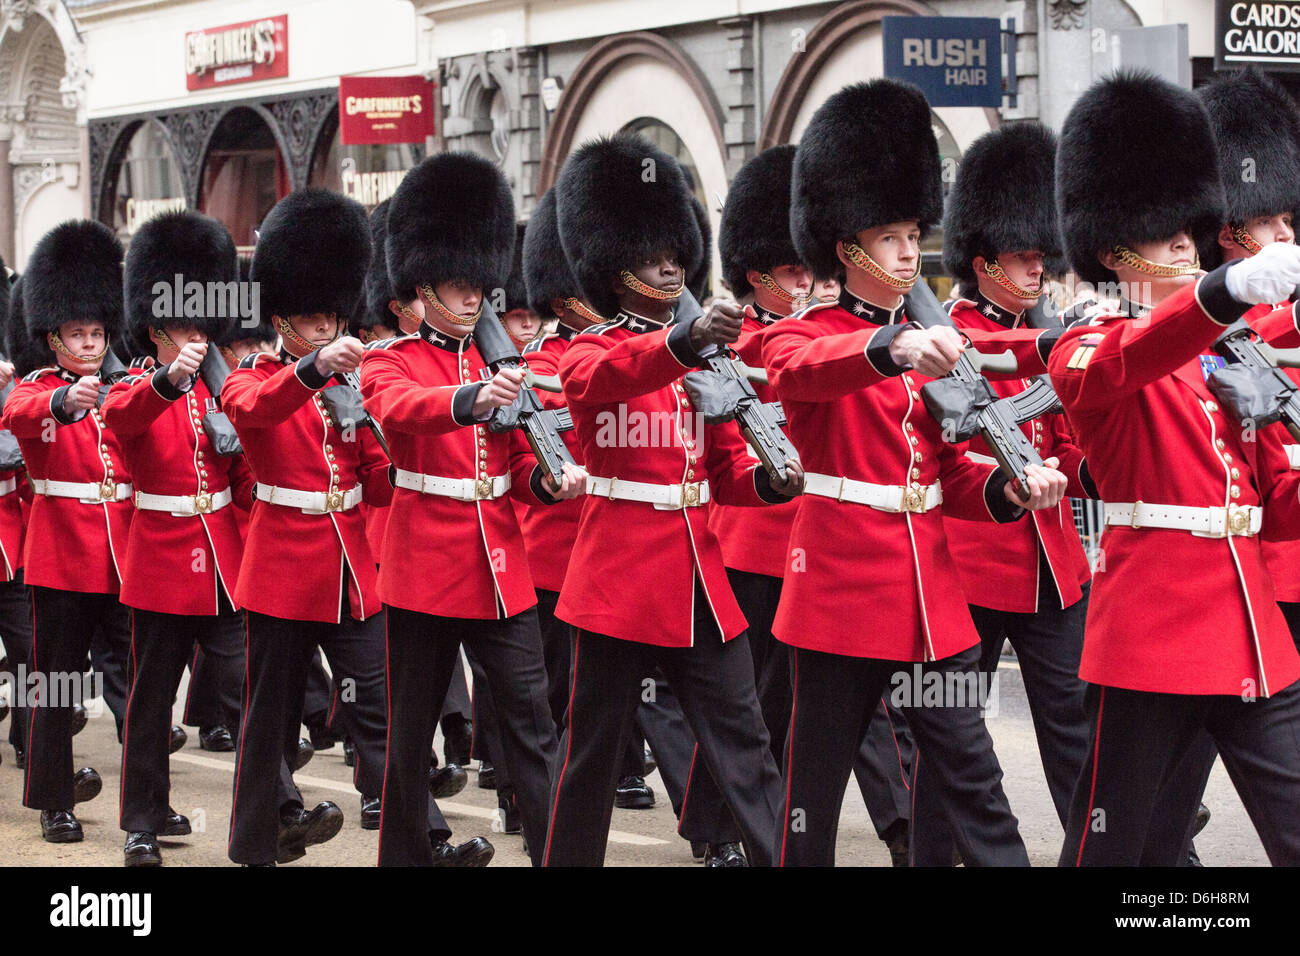 The Queen's Guard marches by, perfectly synchronized as part of the procession for Margaret Thatcher's funeral in London. Stock Photo